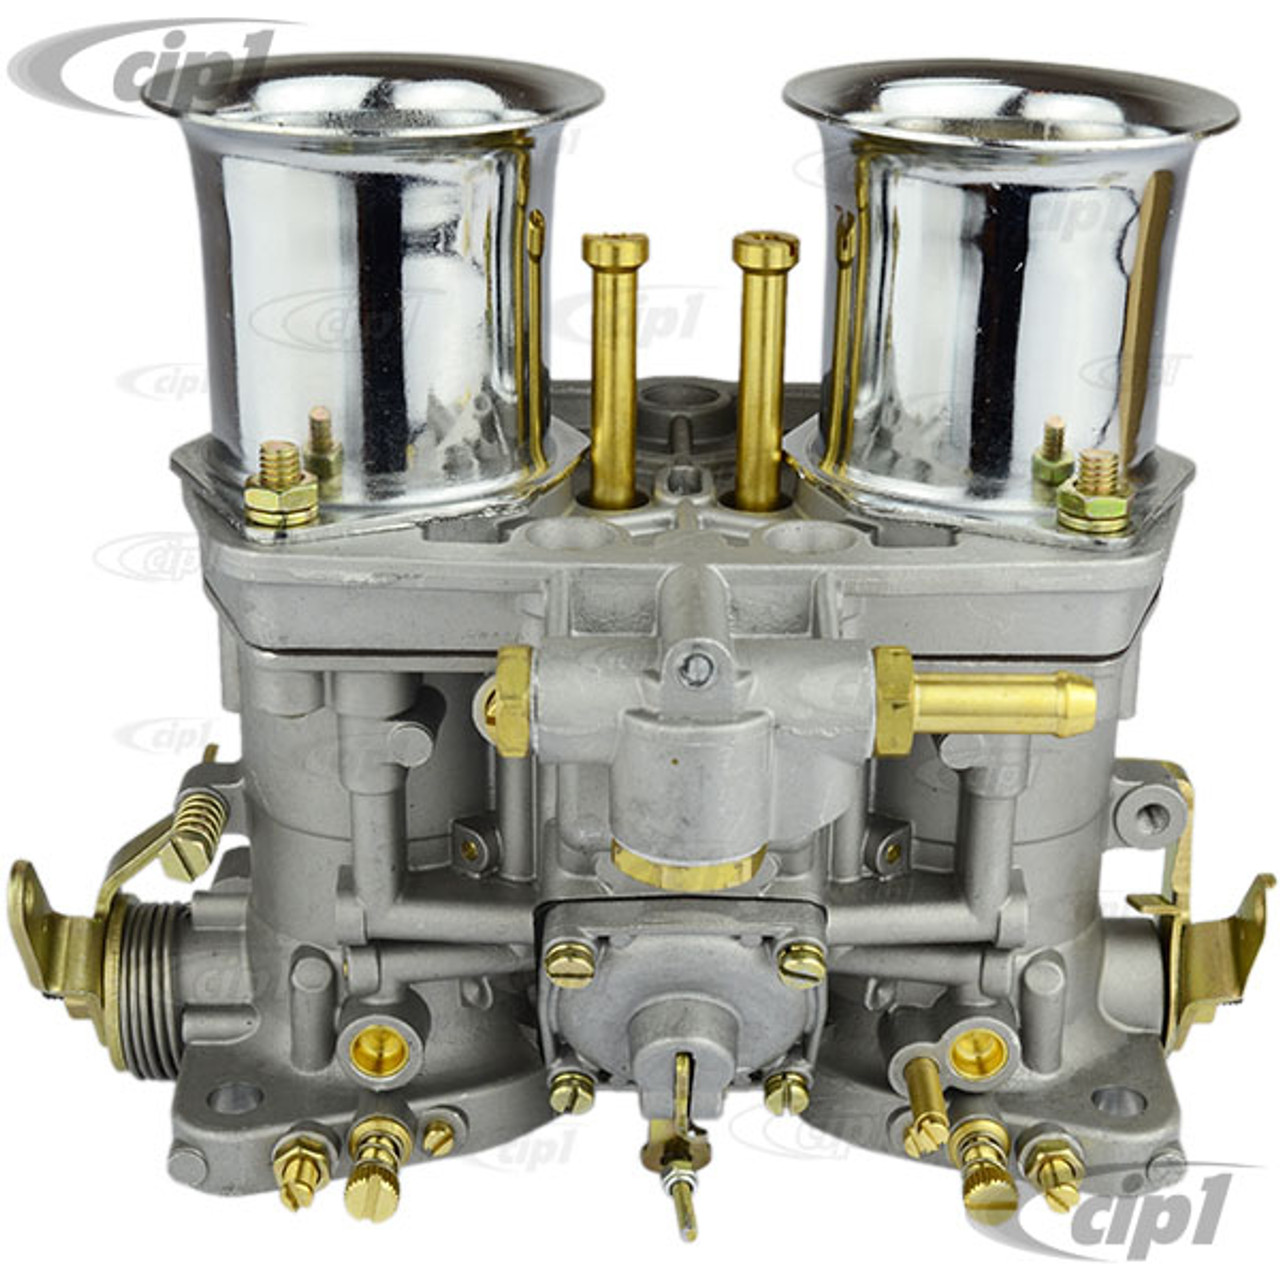 C26-129-540 - 47-1010 - PREMIUM QUALITY - REPLACEMENT 40MM IDF / HPMX  REPLACEMENT CARBURETOR ONLY WITH CHROME STACKS - SOLD EACH